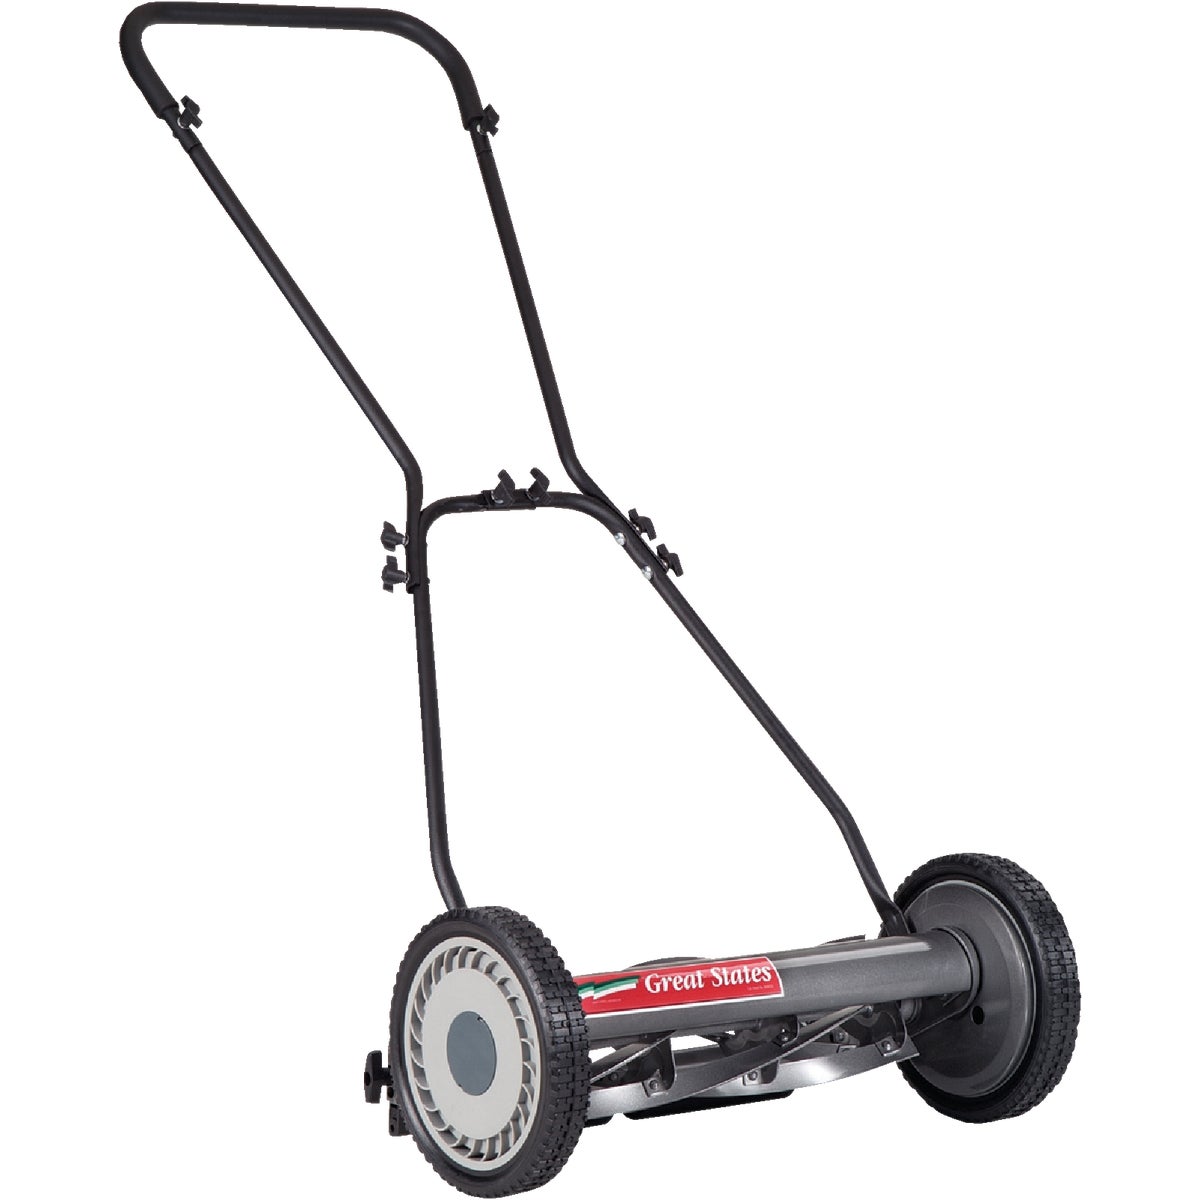 Great States 18 In. Push Reel Lawn Mower